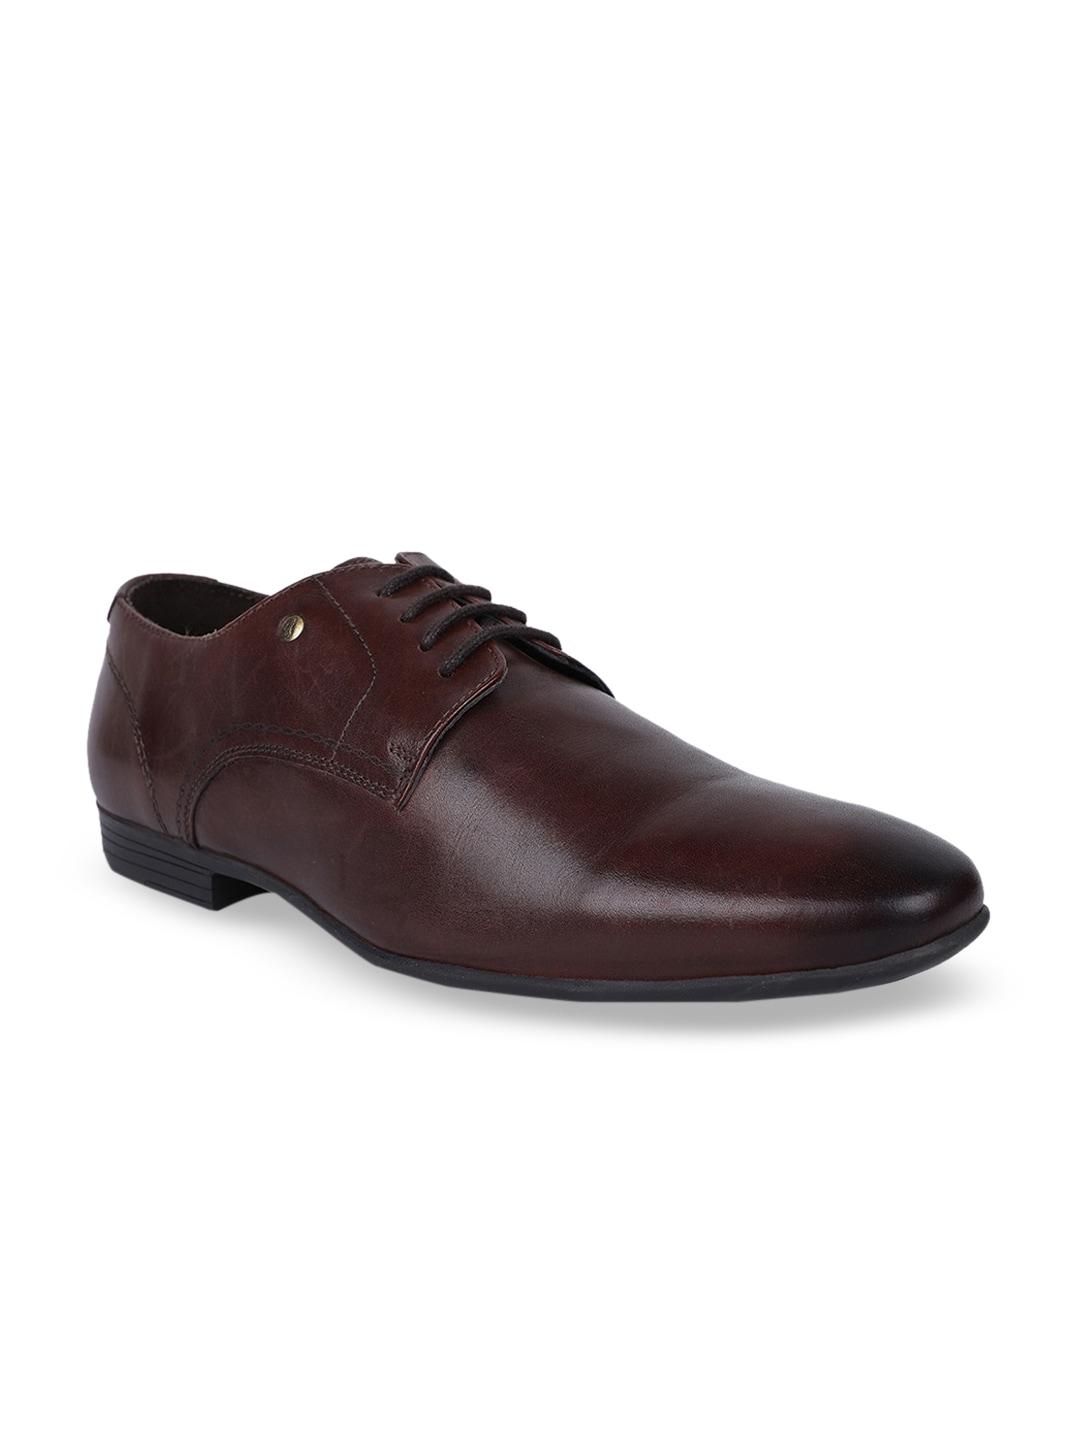 hush-puppies-men-brown-solid-leather-formal-derbys